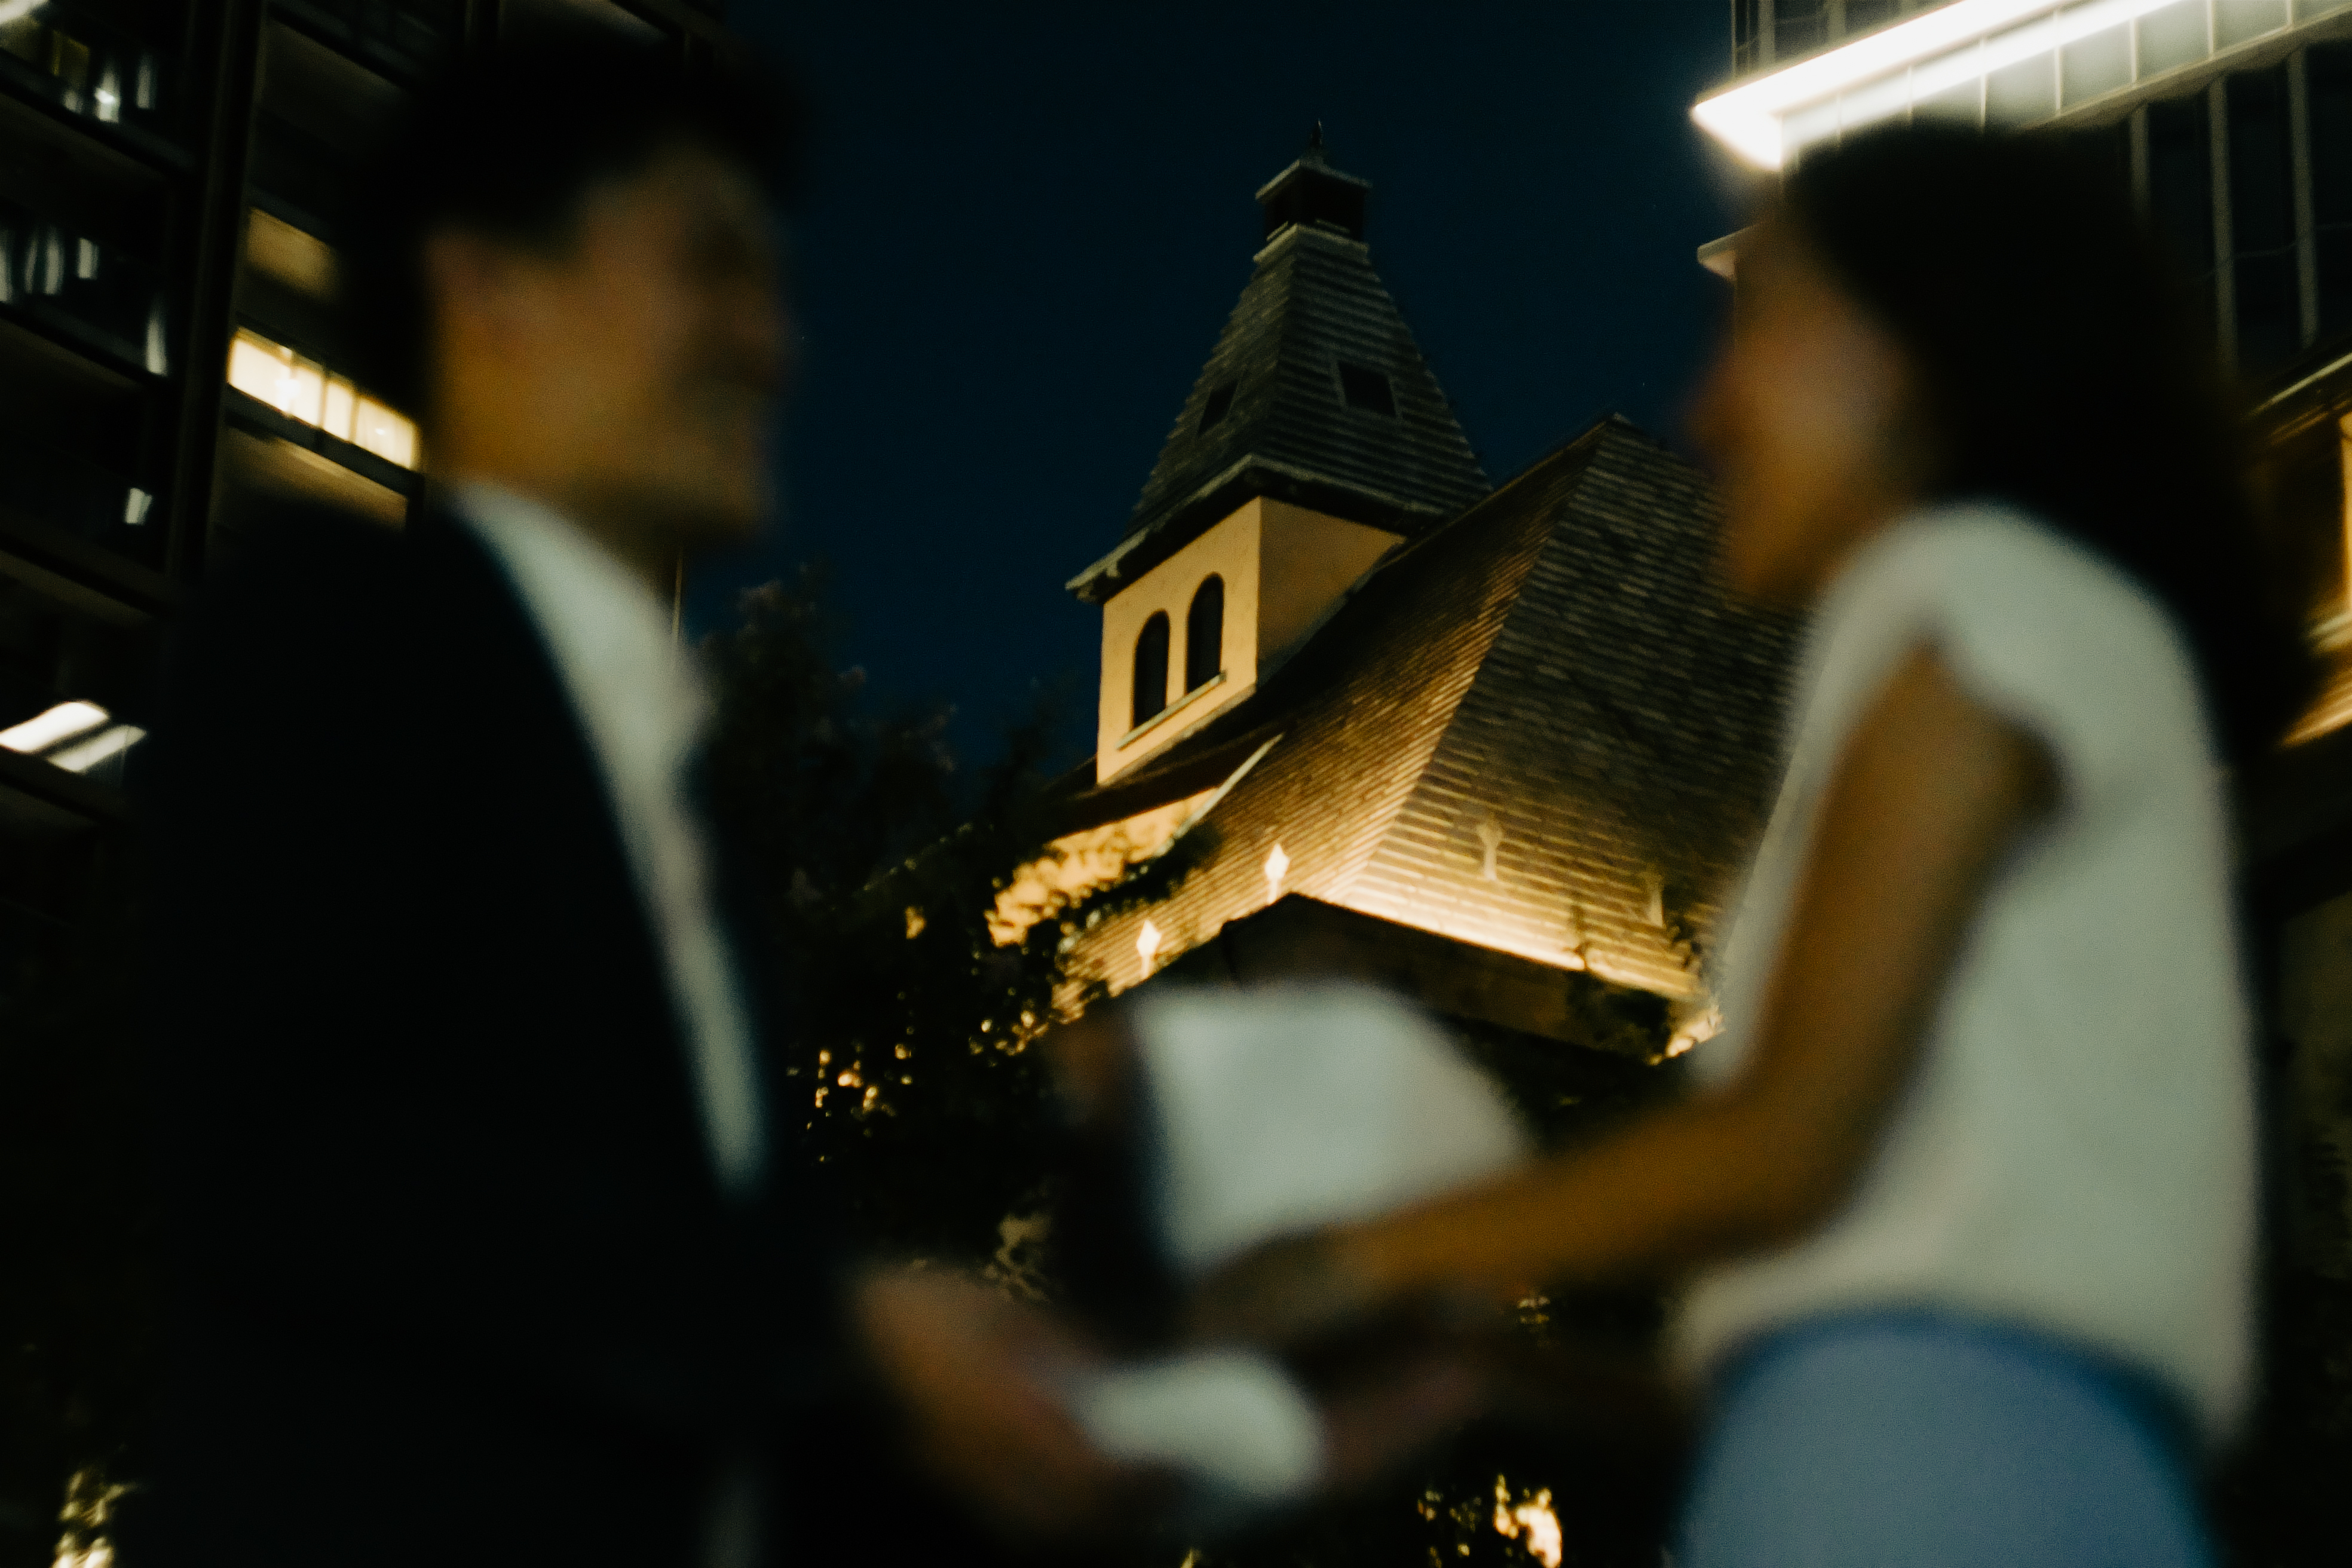 Would you like to propose at The Classic House at Akasaka Prince?